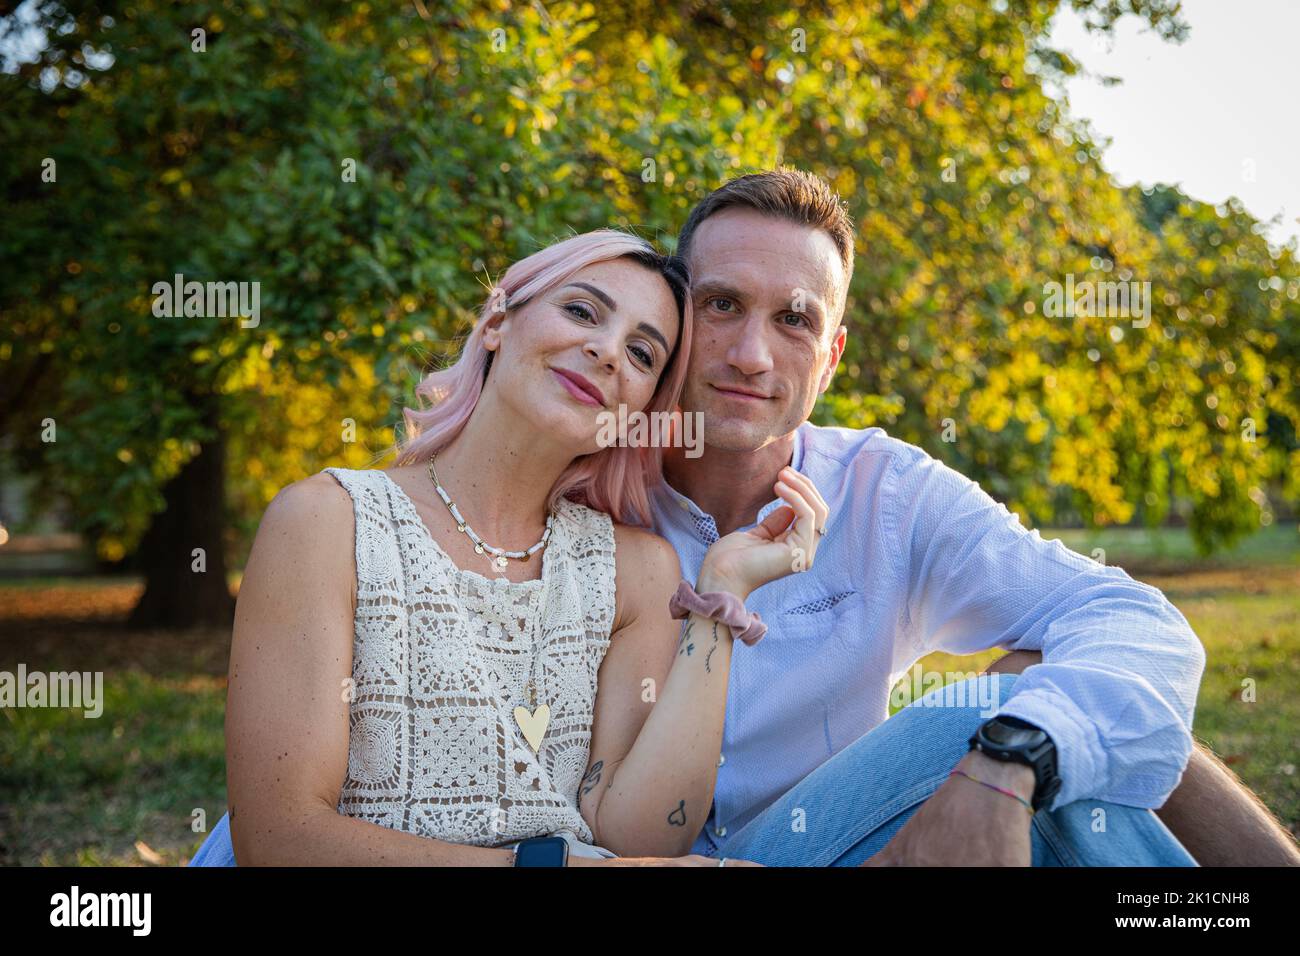 A loving couple sitting together in a park in the open air, partners enjoying their time together. Stock Photo